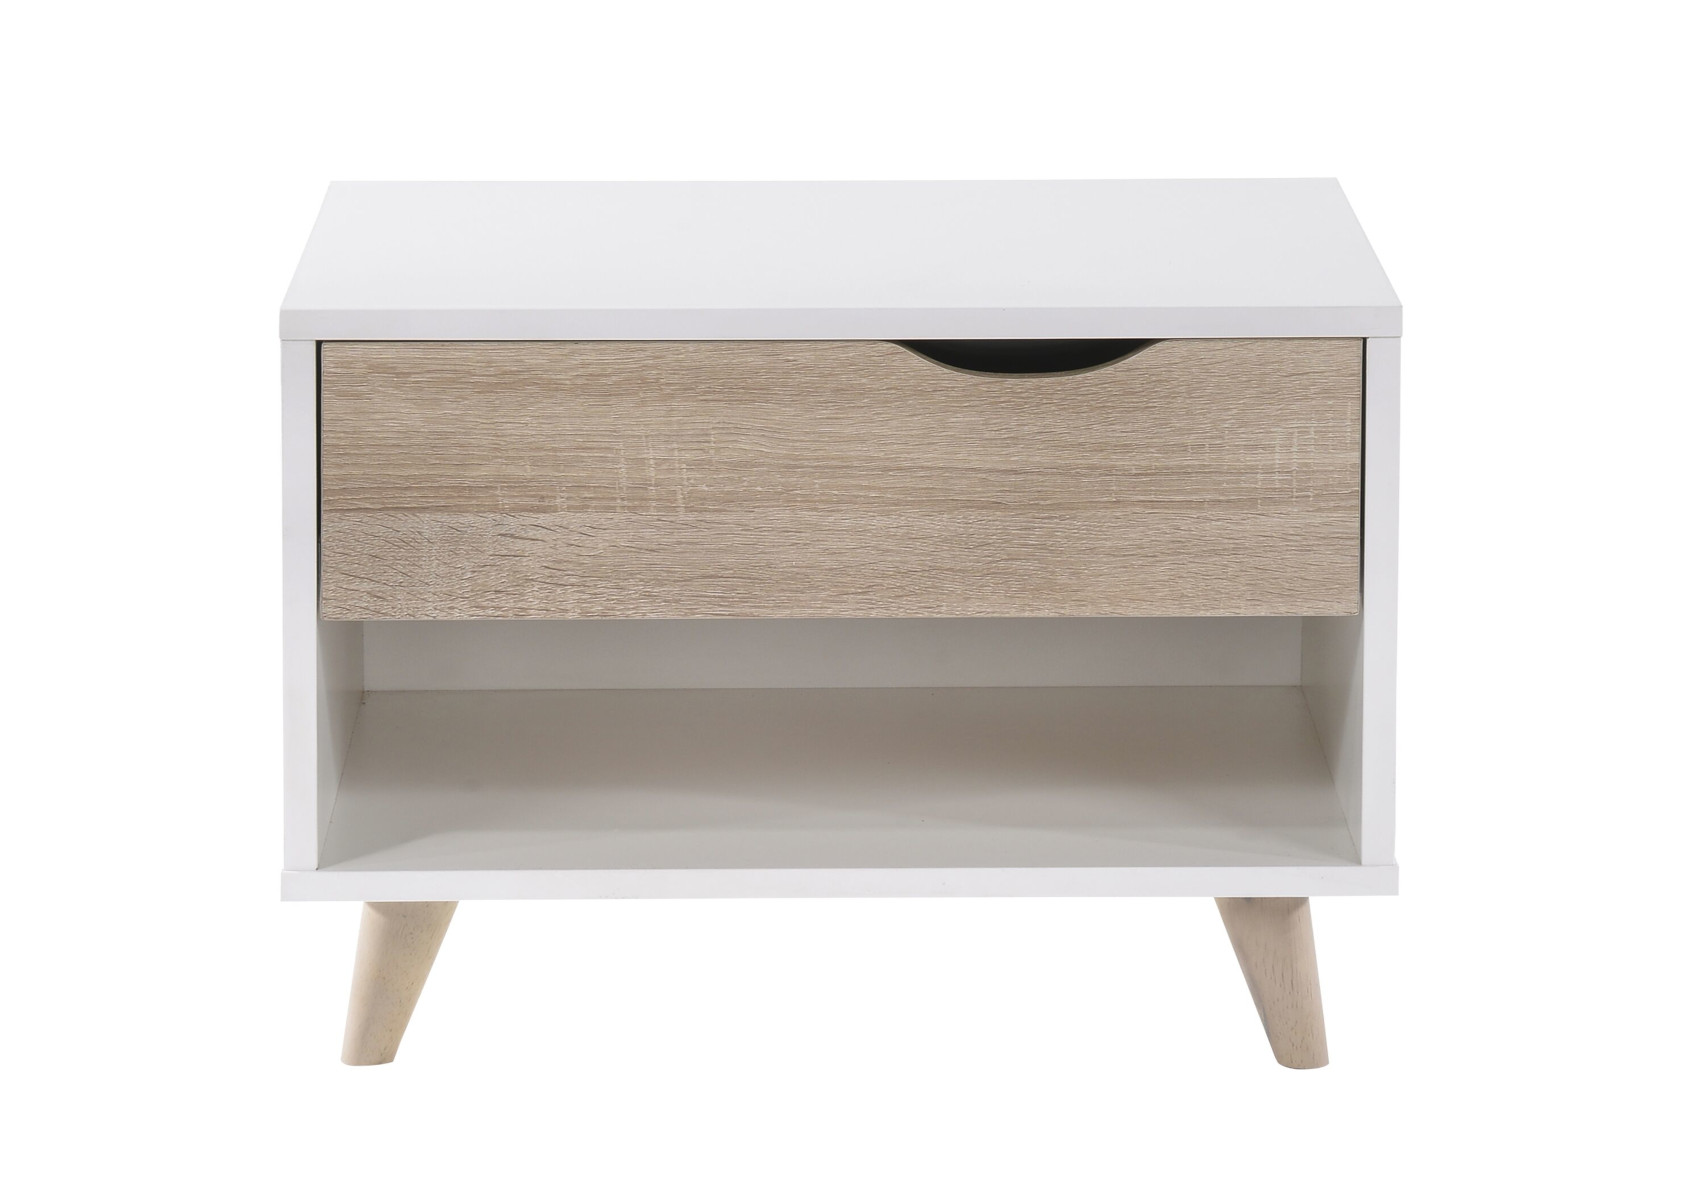 View Stockholm White 1 Drawer Bedside Table Time4Sleep information